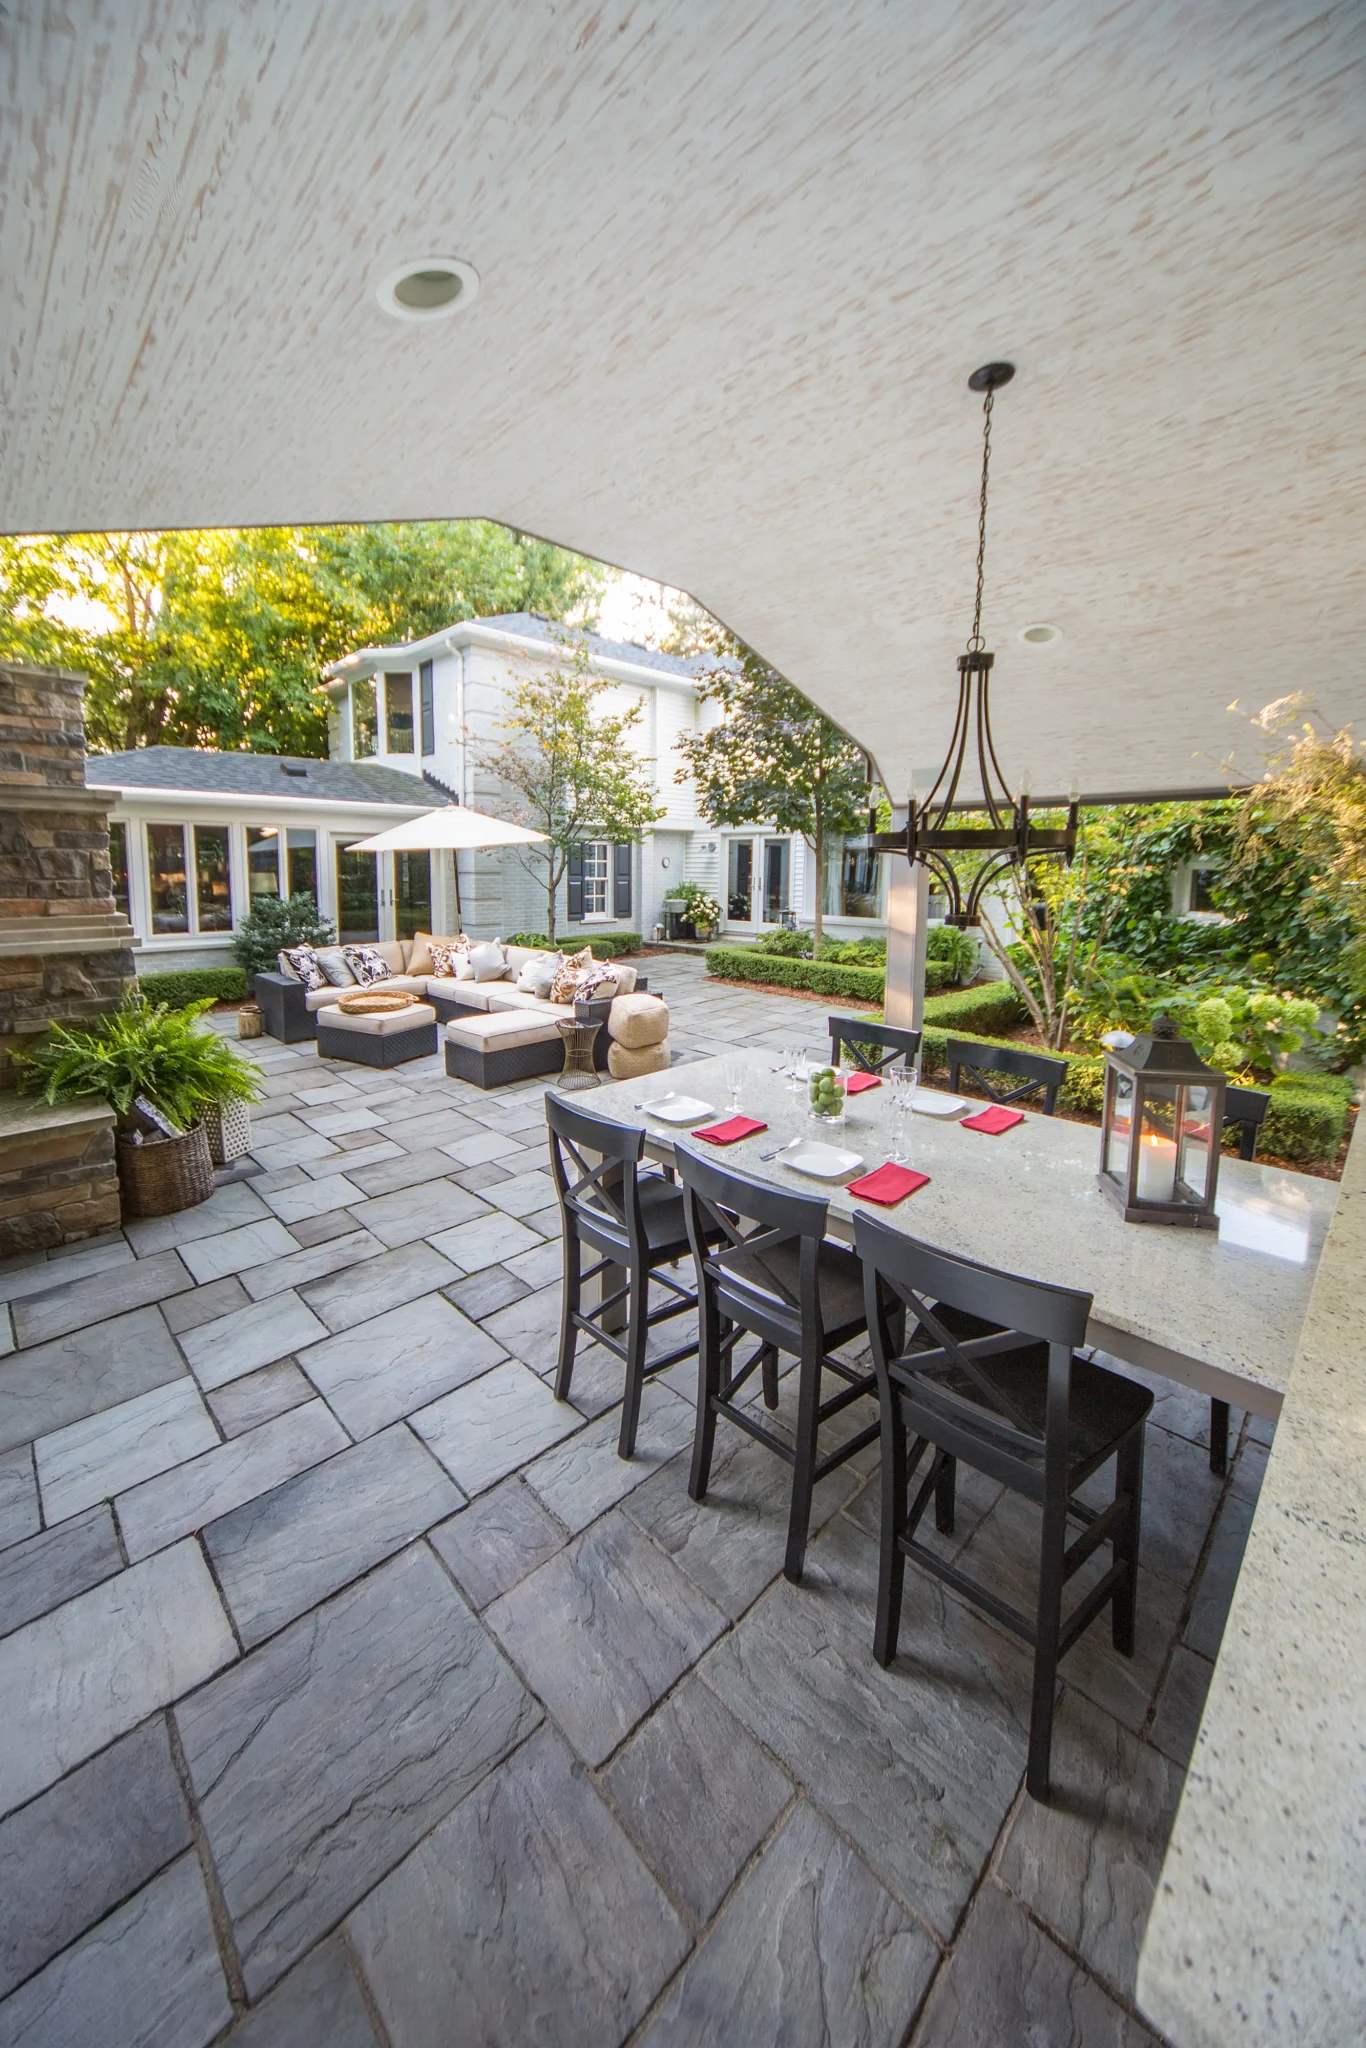 Well landscaped home's backyard patio area